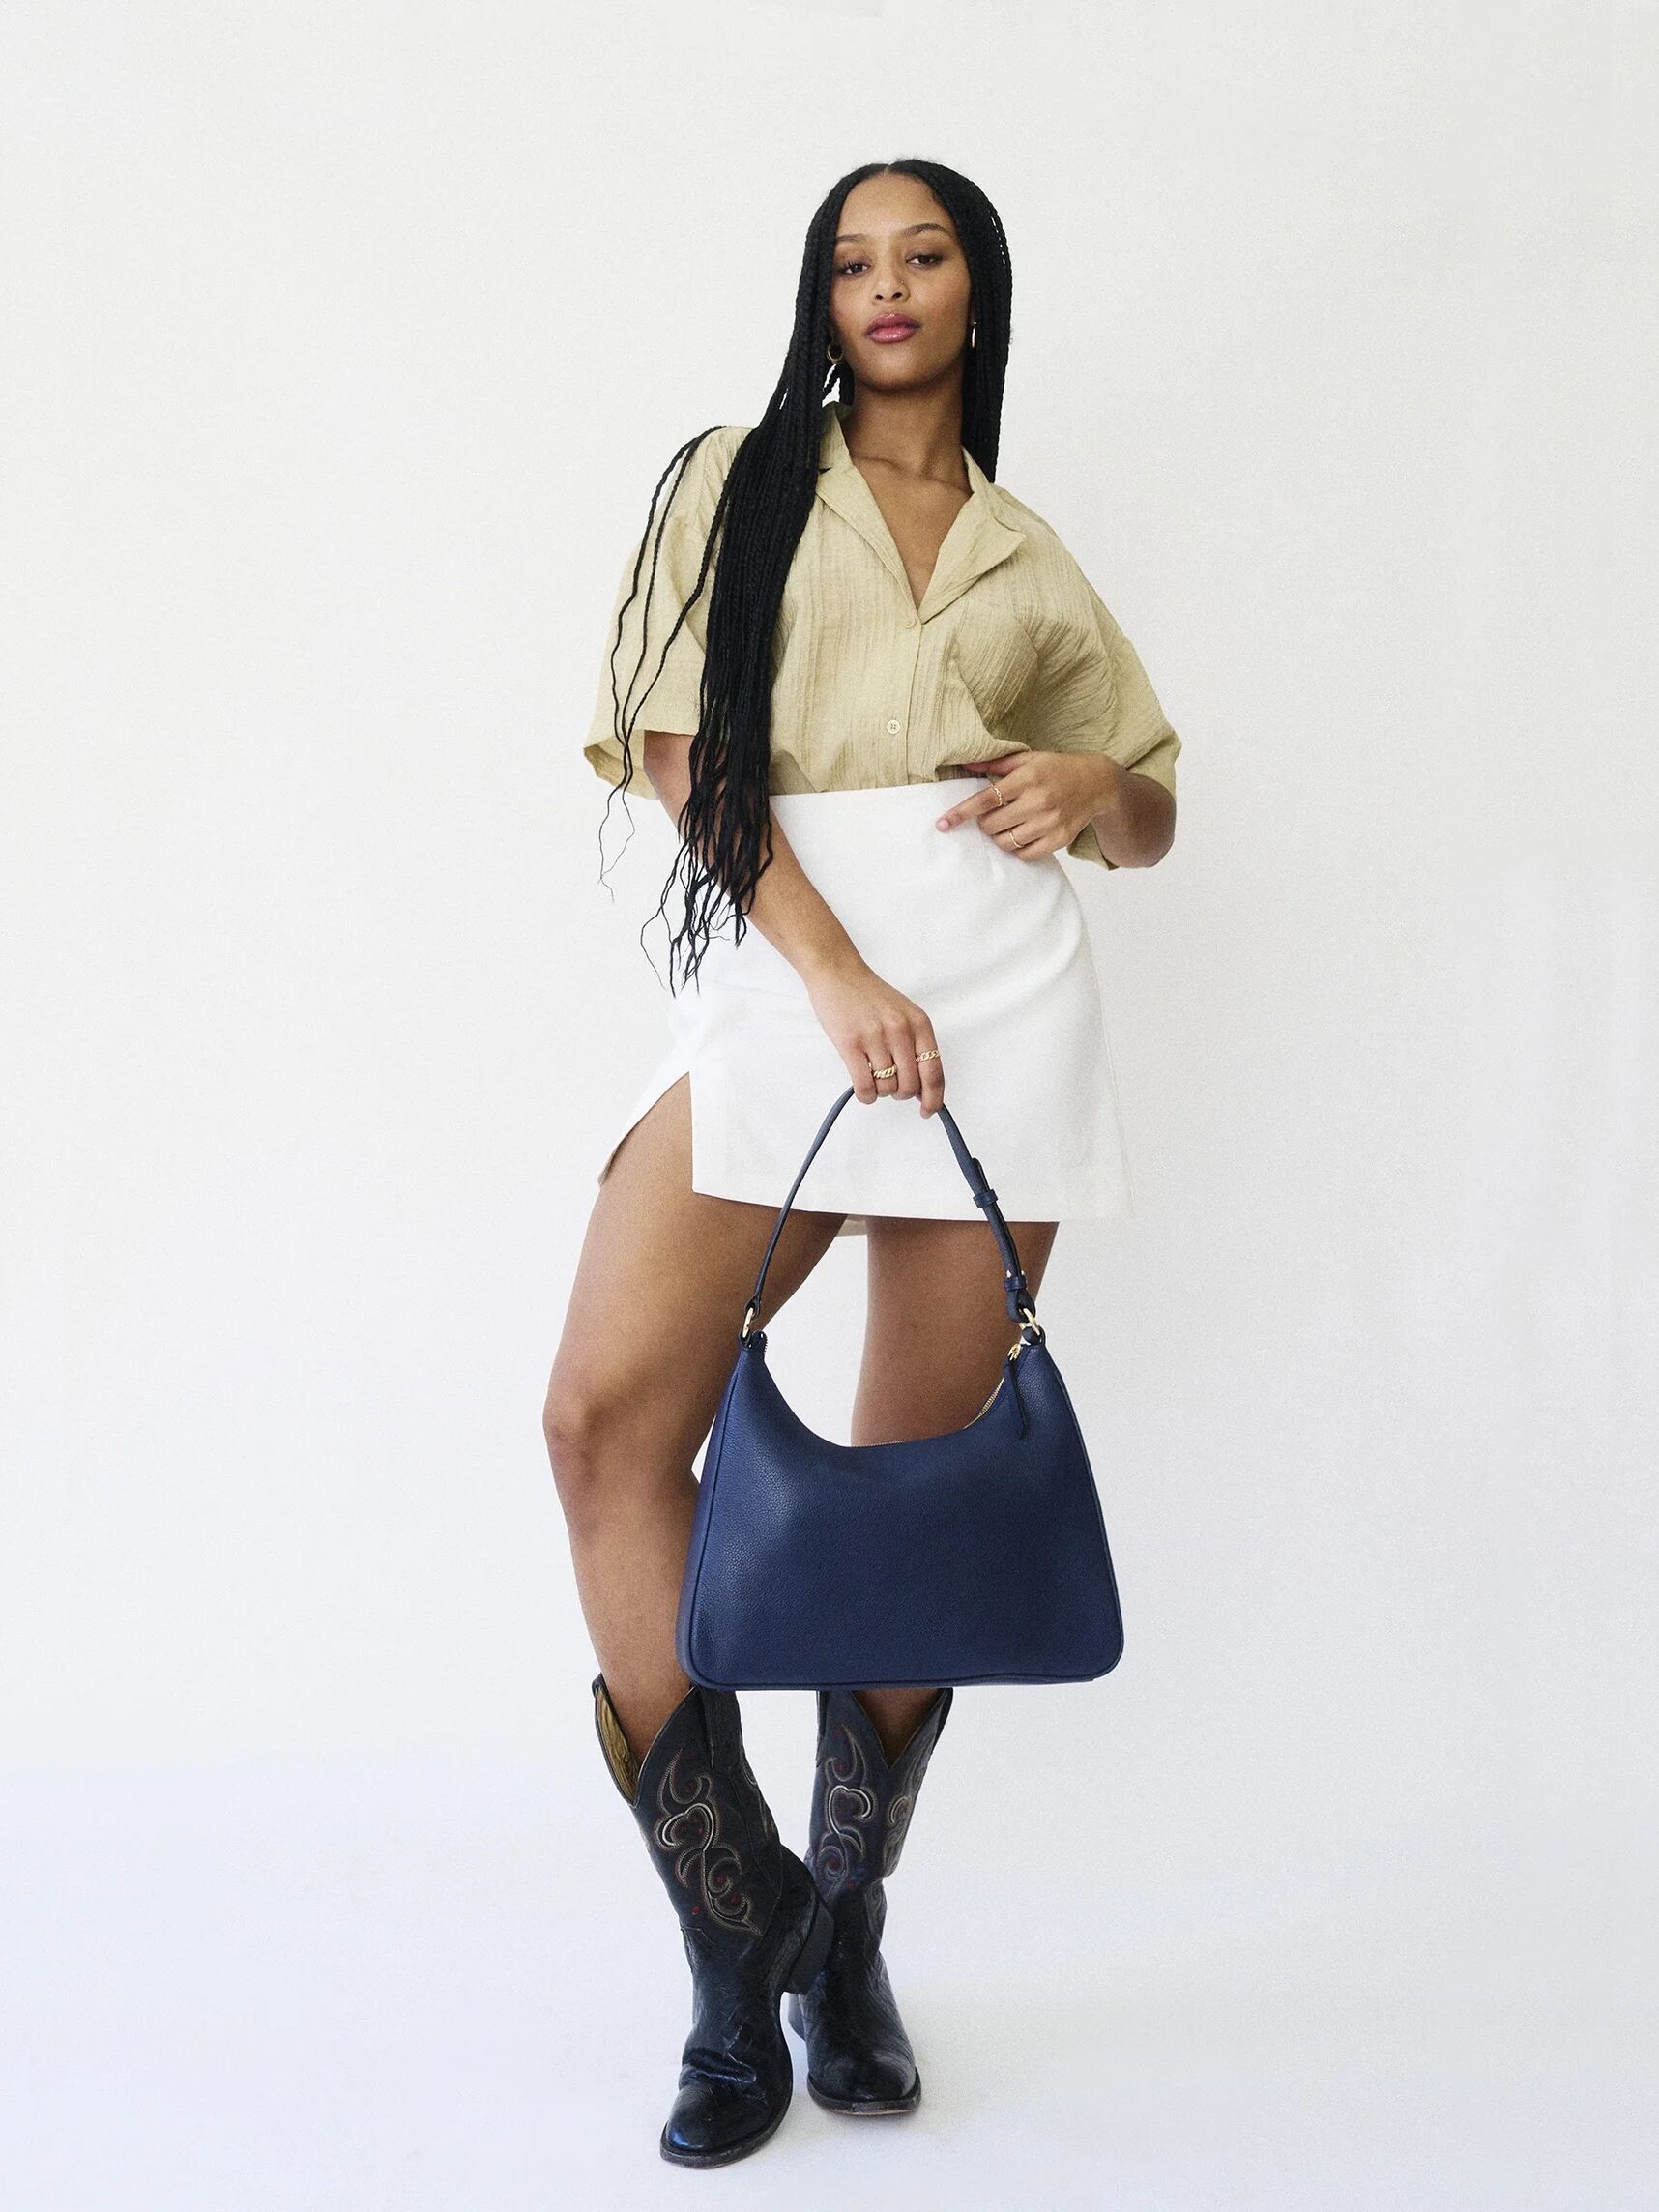 A woman posing with a blue handbag, wearing a white skirt, beige blouse, and black boots.